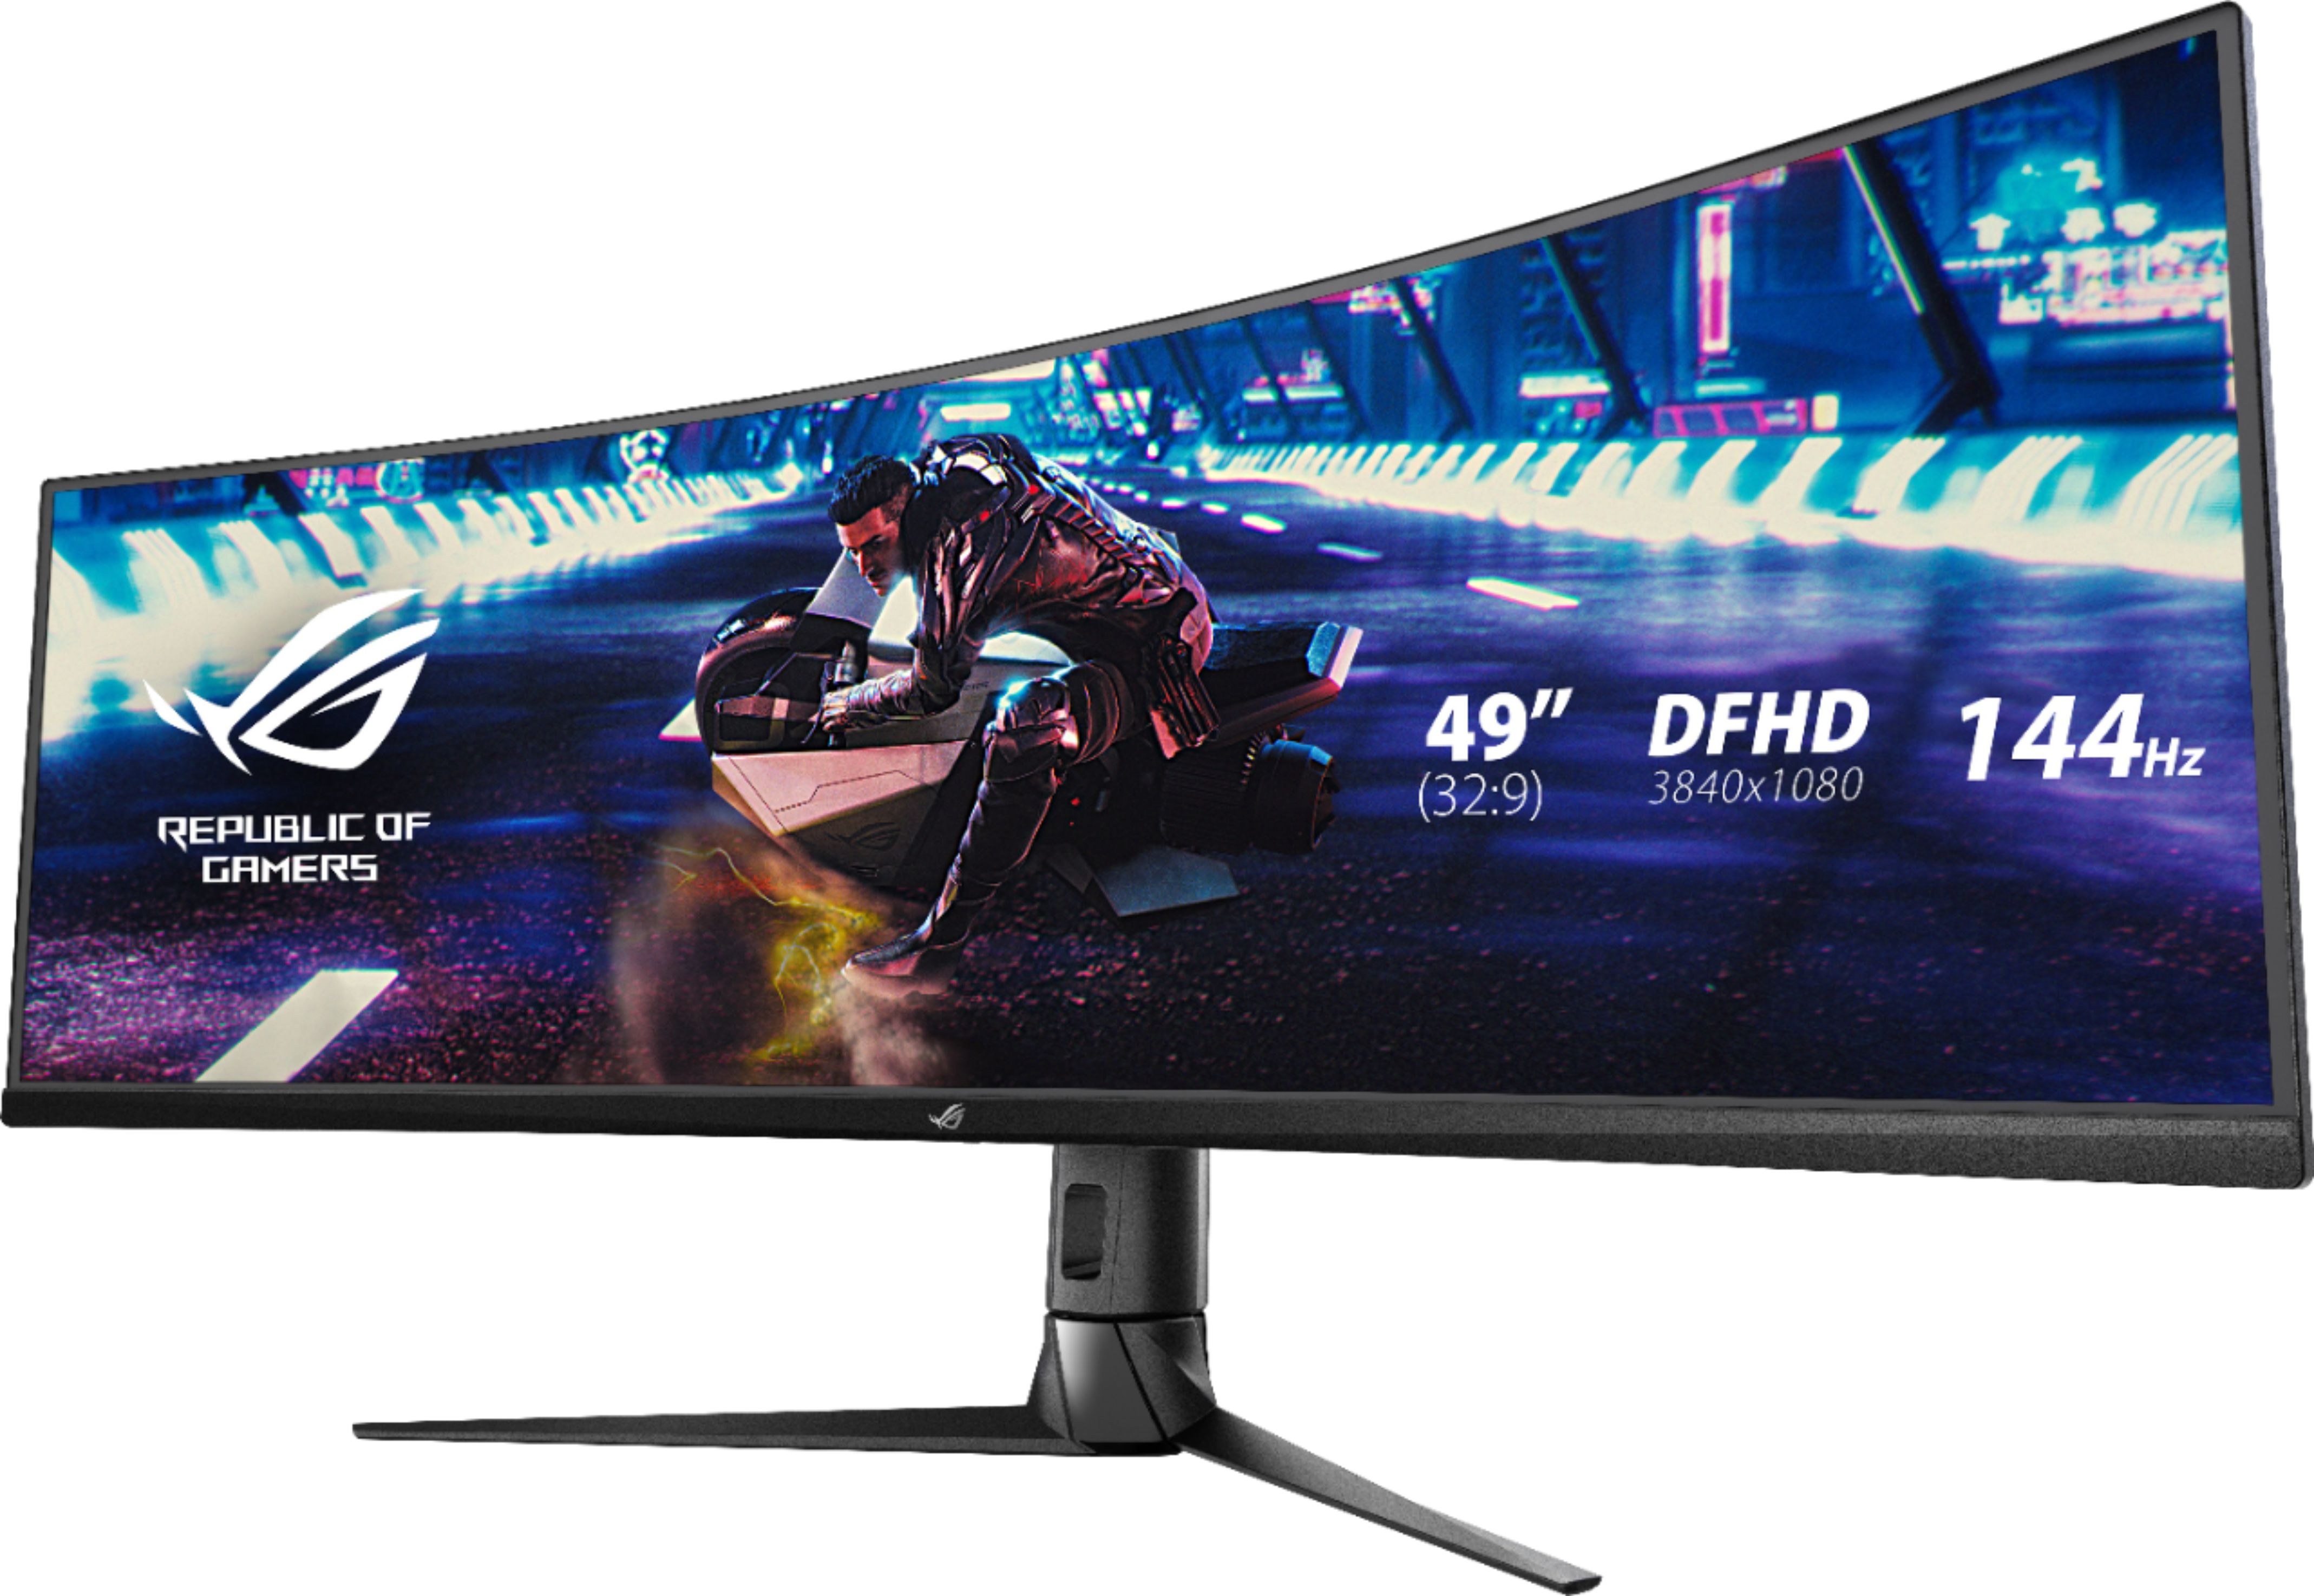 Level up your gaming with a curved 144Hz FreeSync monitor for $130